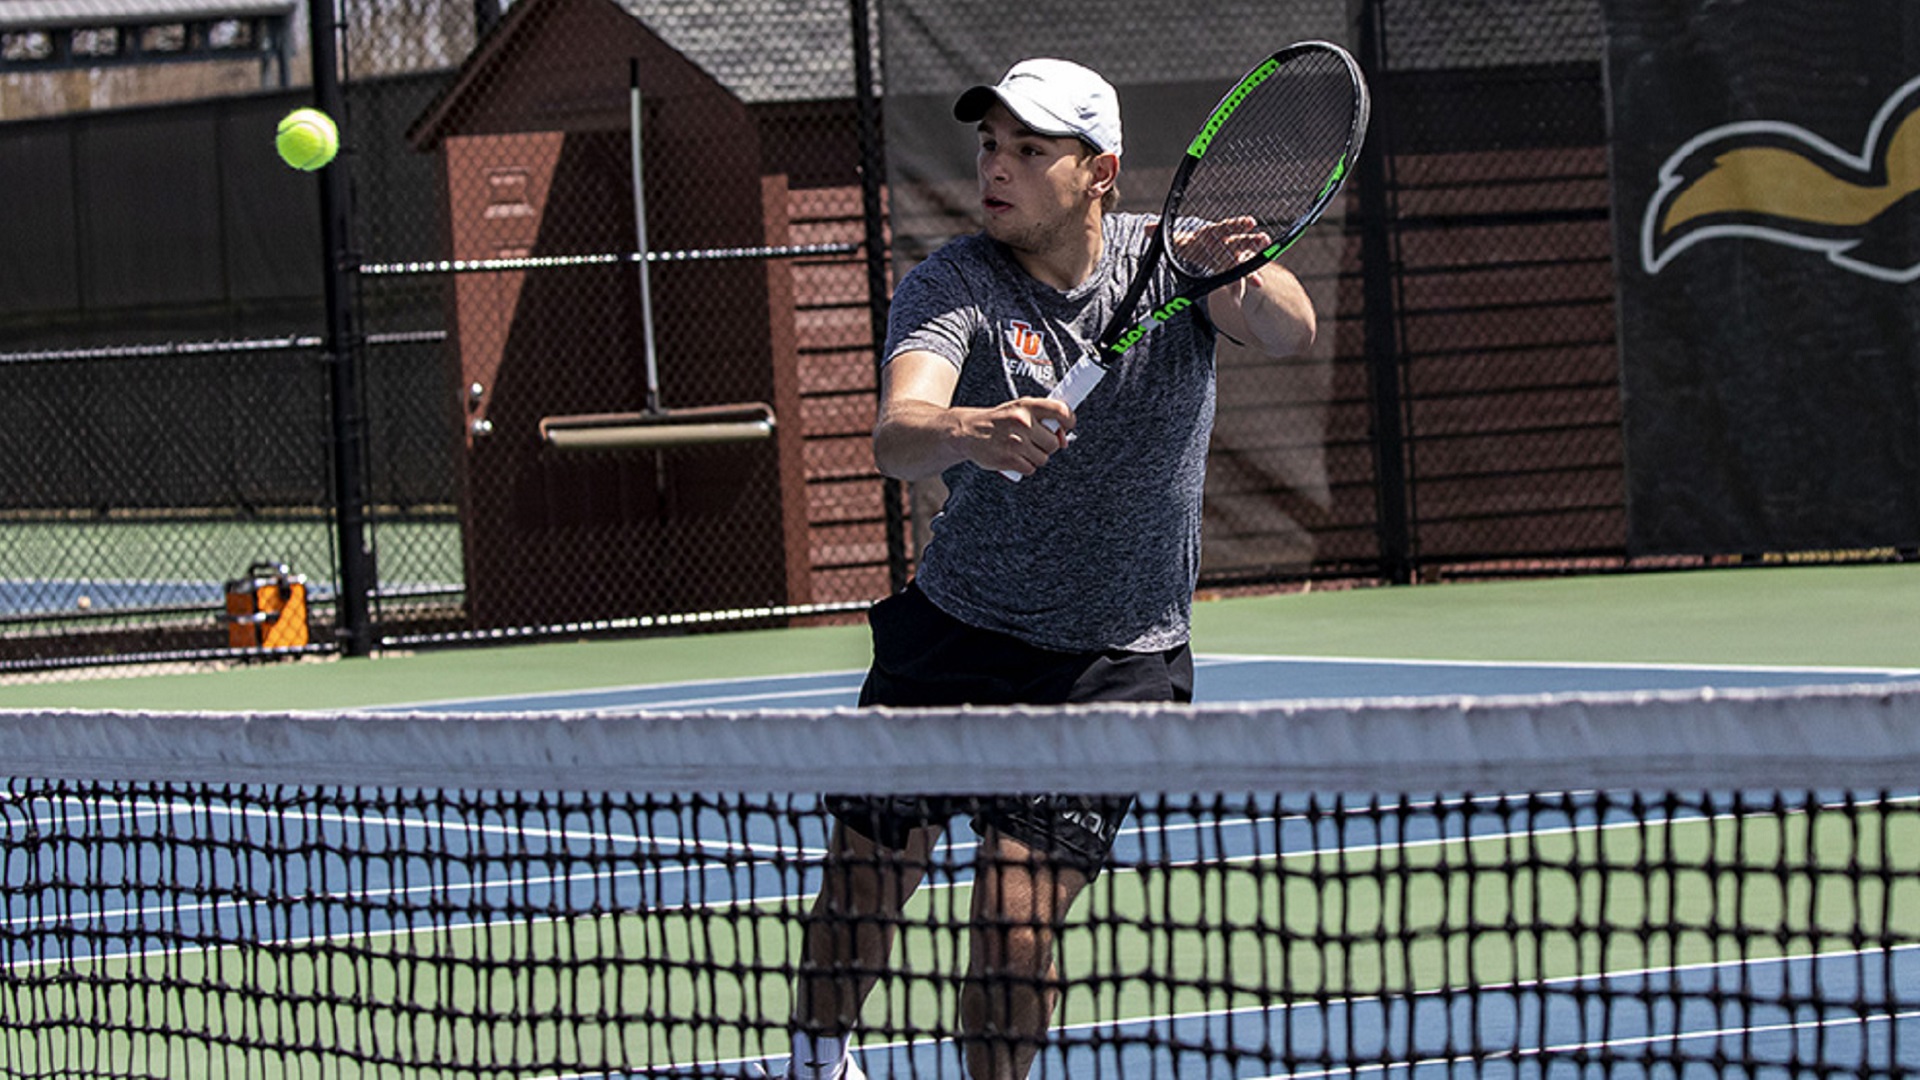 Vadzim Raitsou teamed with Jacco Mensinga for a doubles victory against Catawba (photo by Chuck Williams)